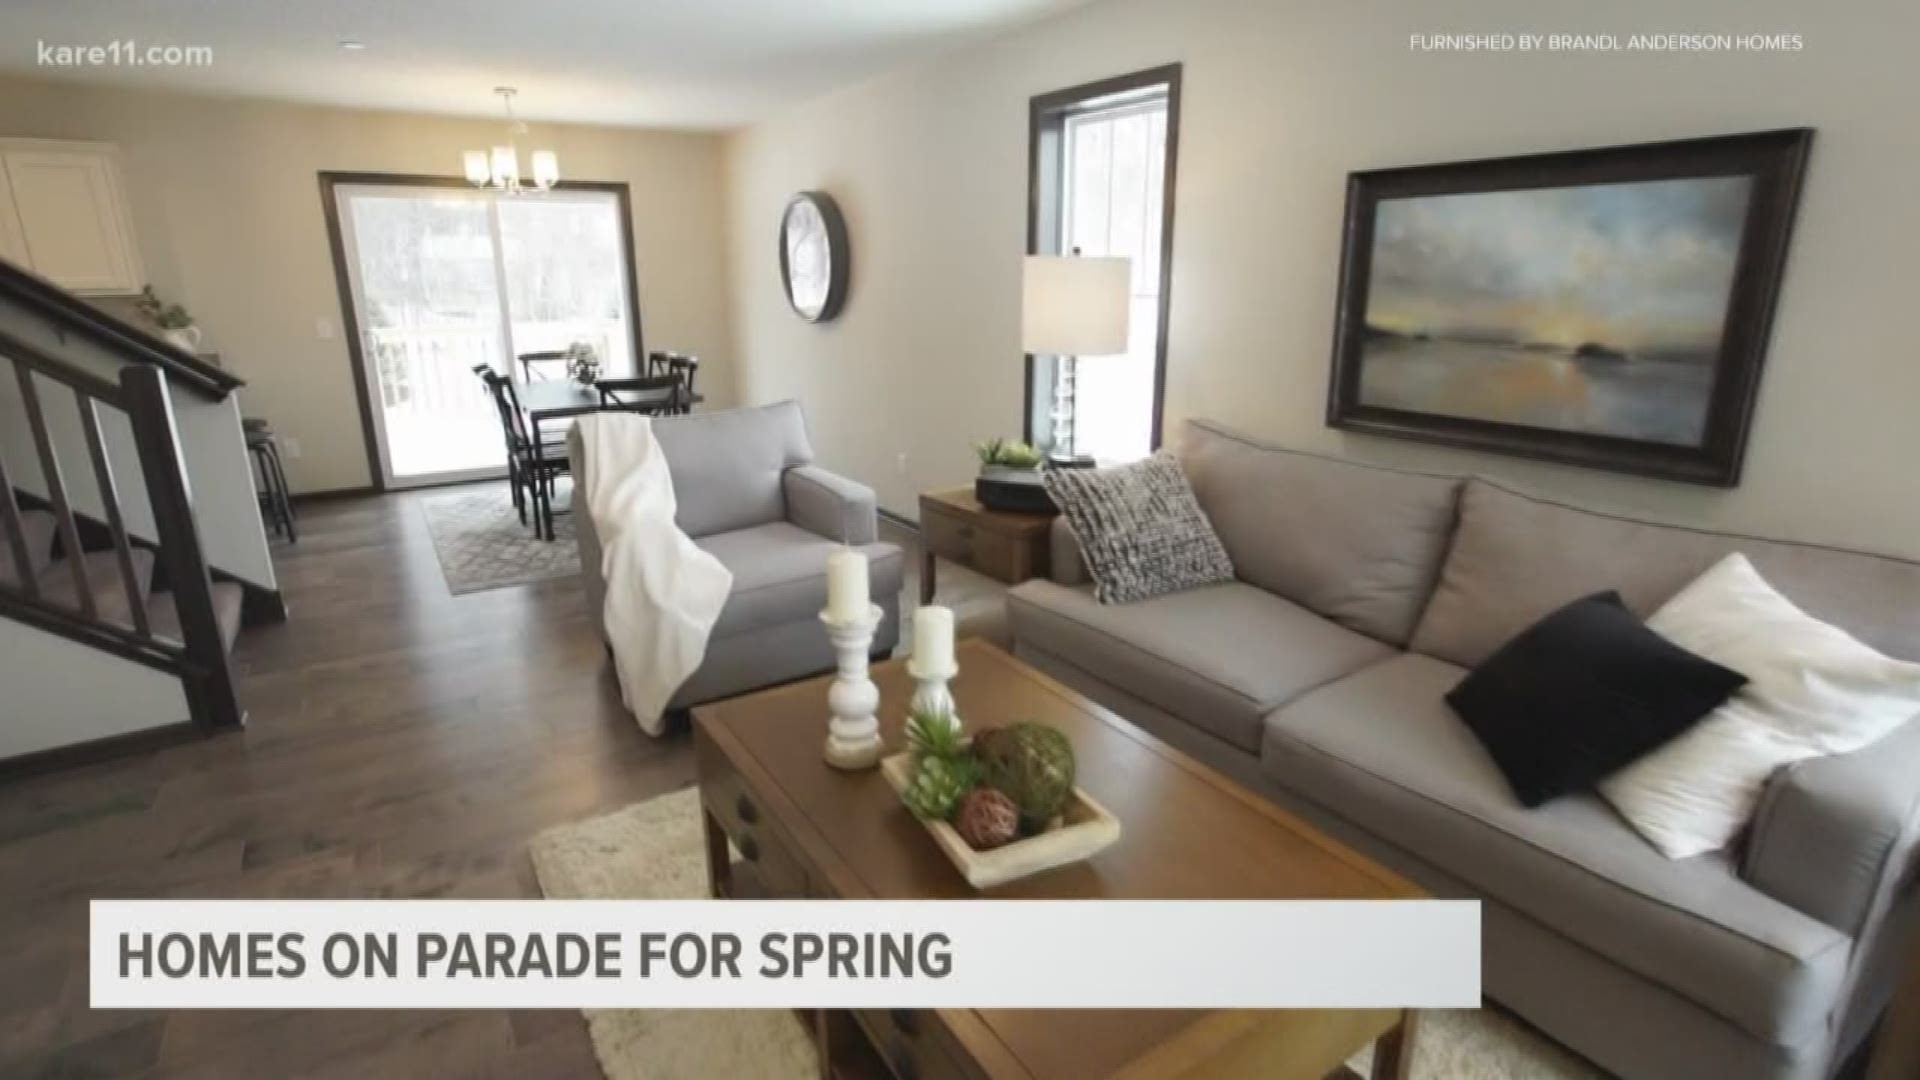 Another sign of the changing seasons, the 2020 Spring Parade of Homes is ready to welcome would be home buyers and anyone looking for some design inspiration.